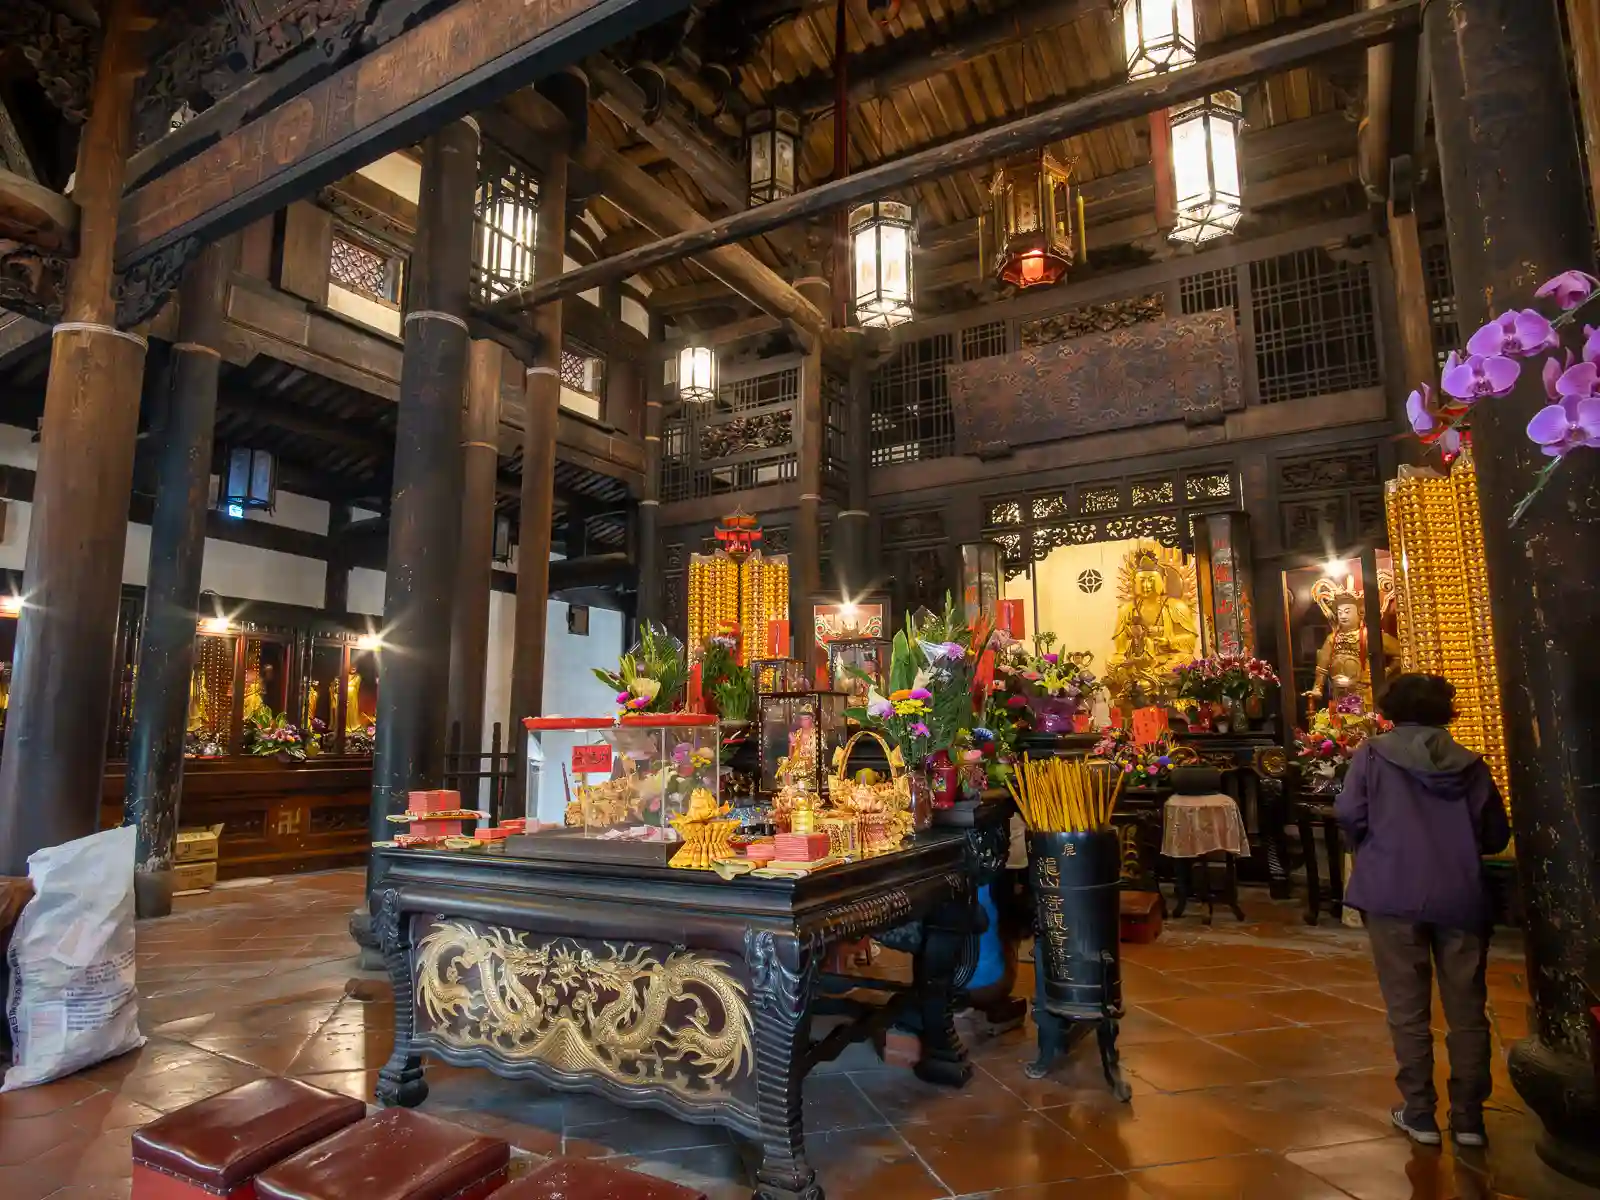 The interior of Lukang Longshan temple has golden effigies, wooden lanterns, and offerings on display.